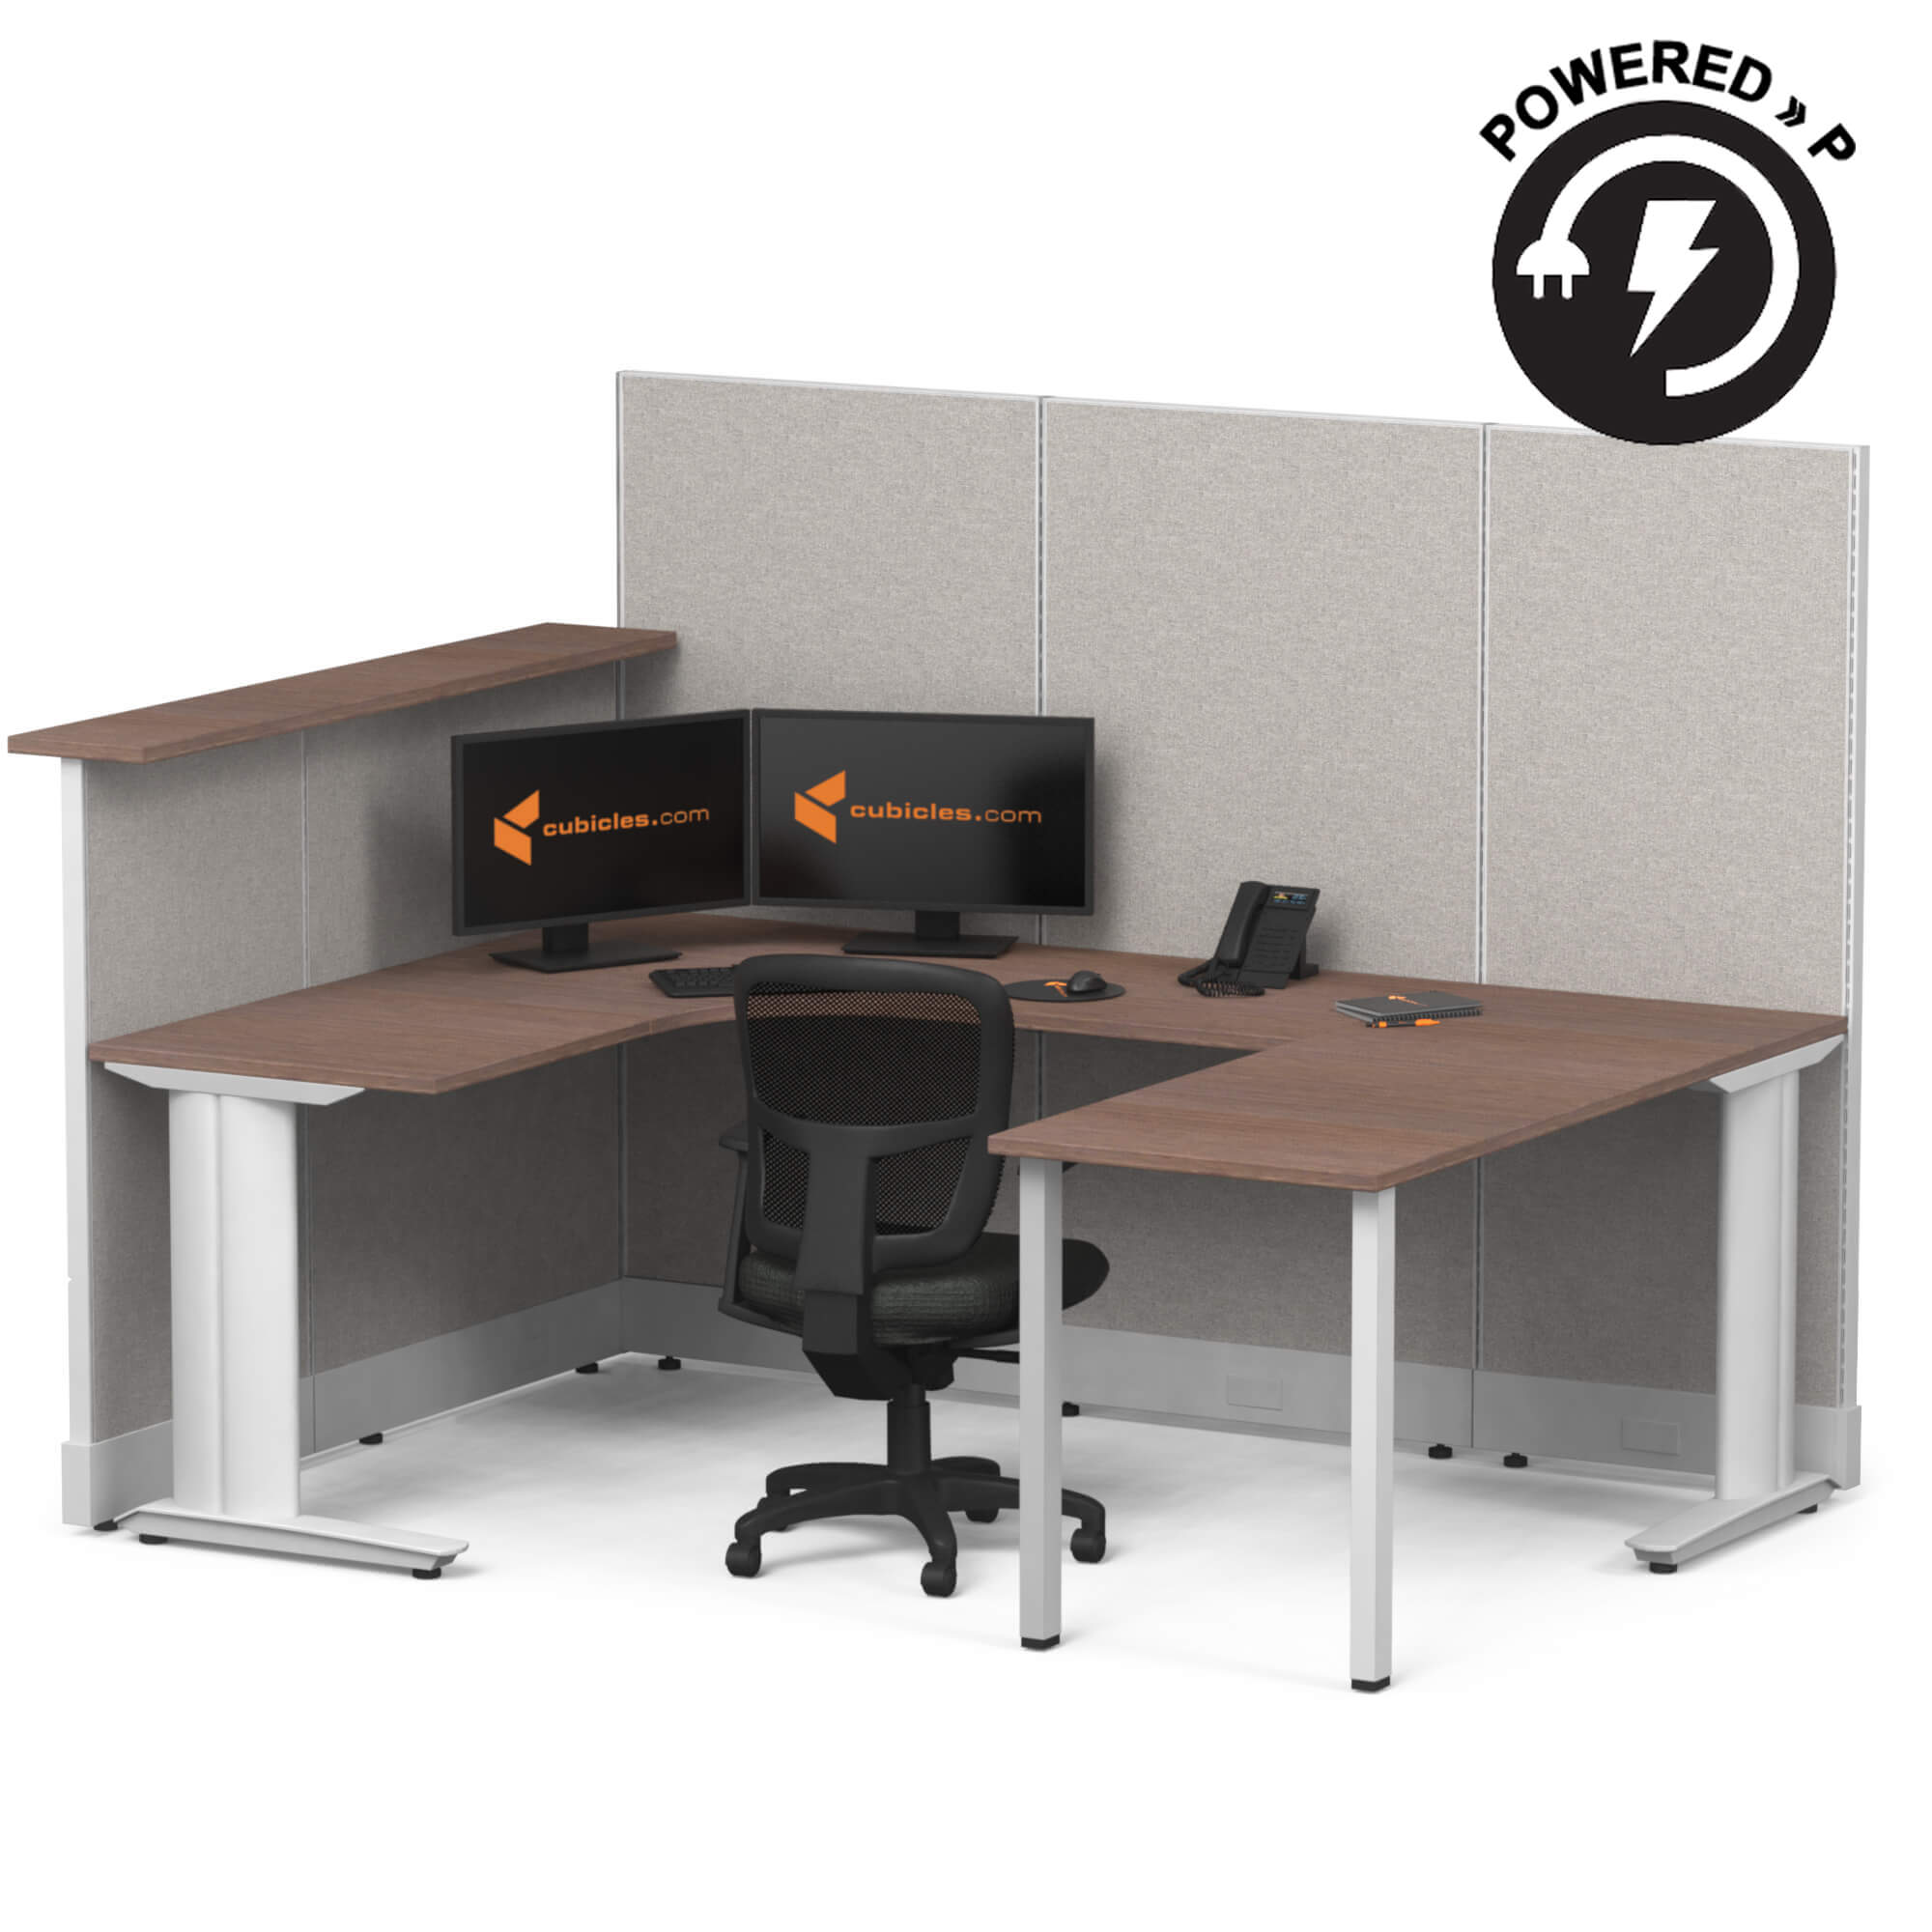 Cubicle desk u shaped with transaction top 1pack powered